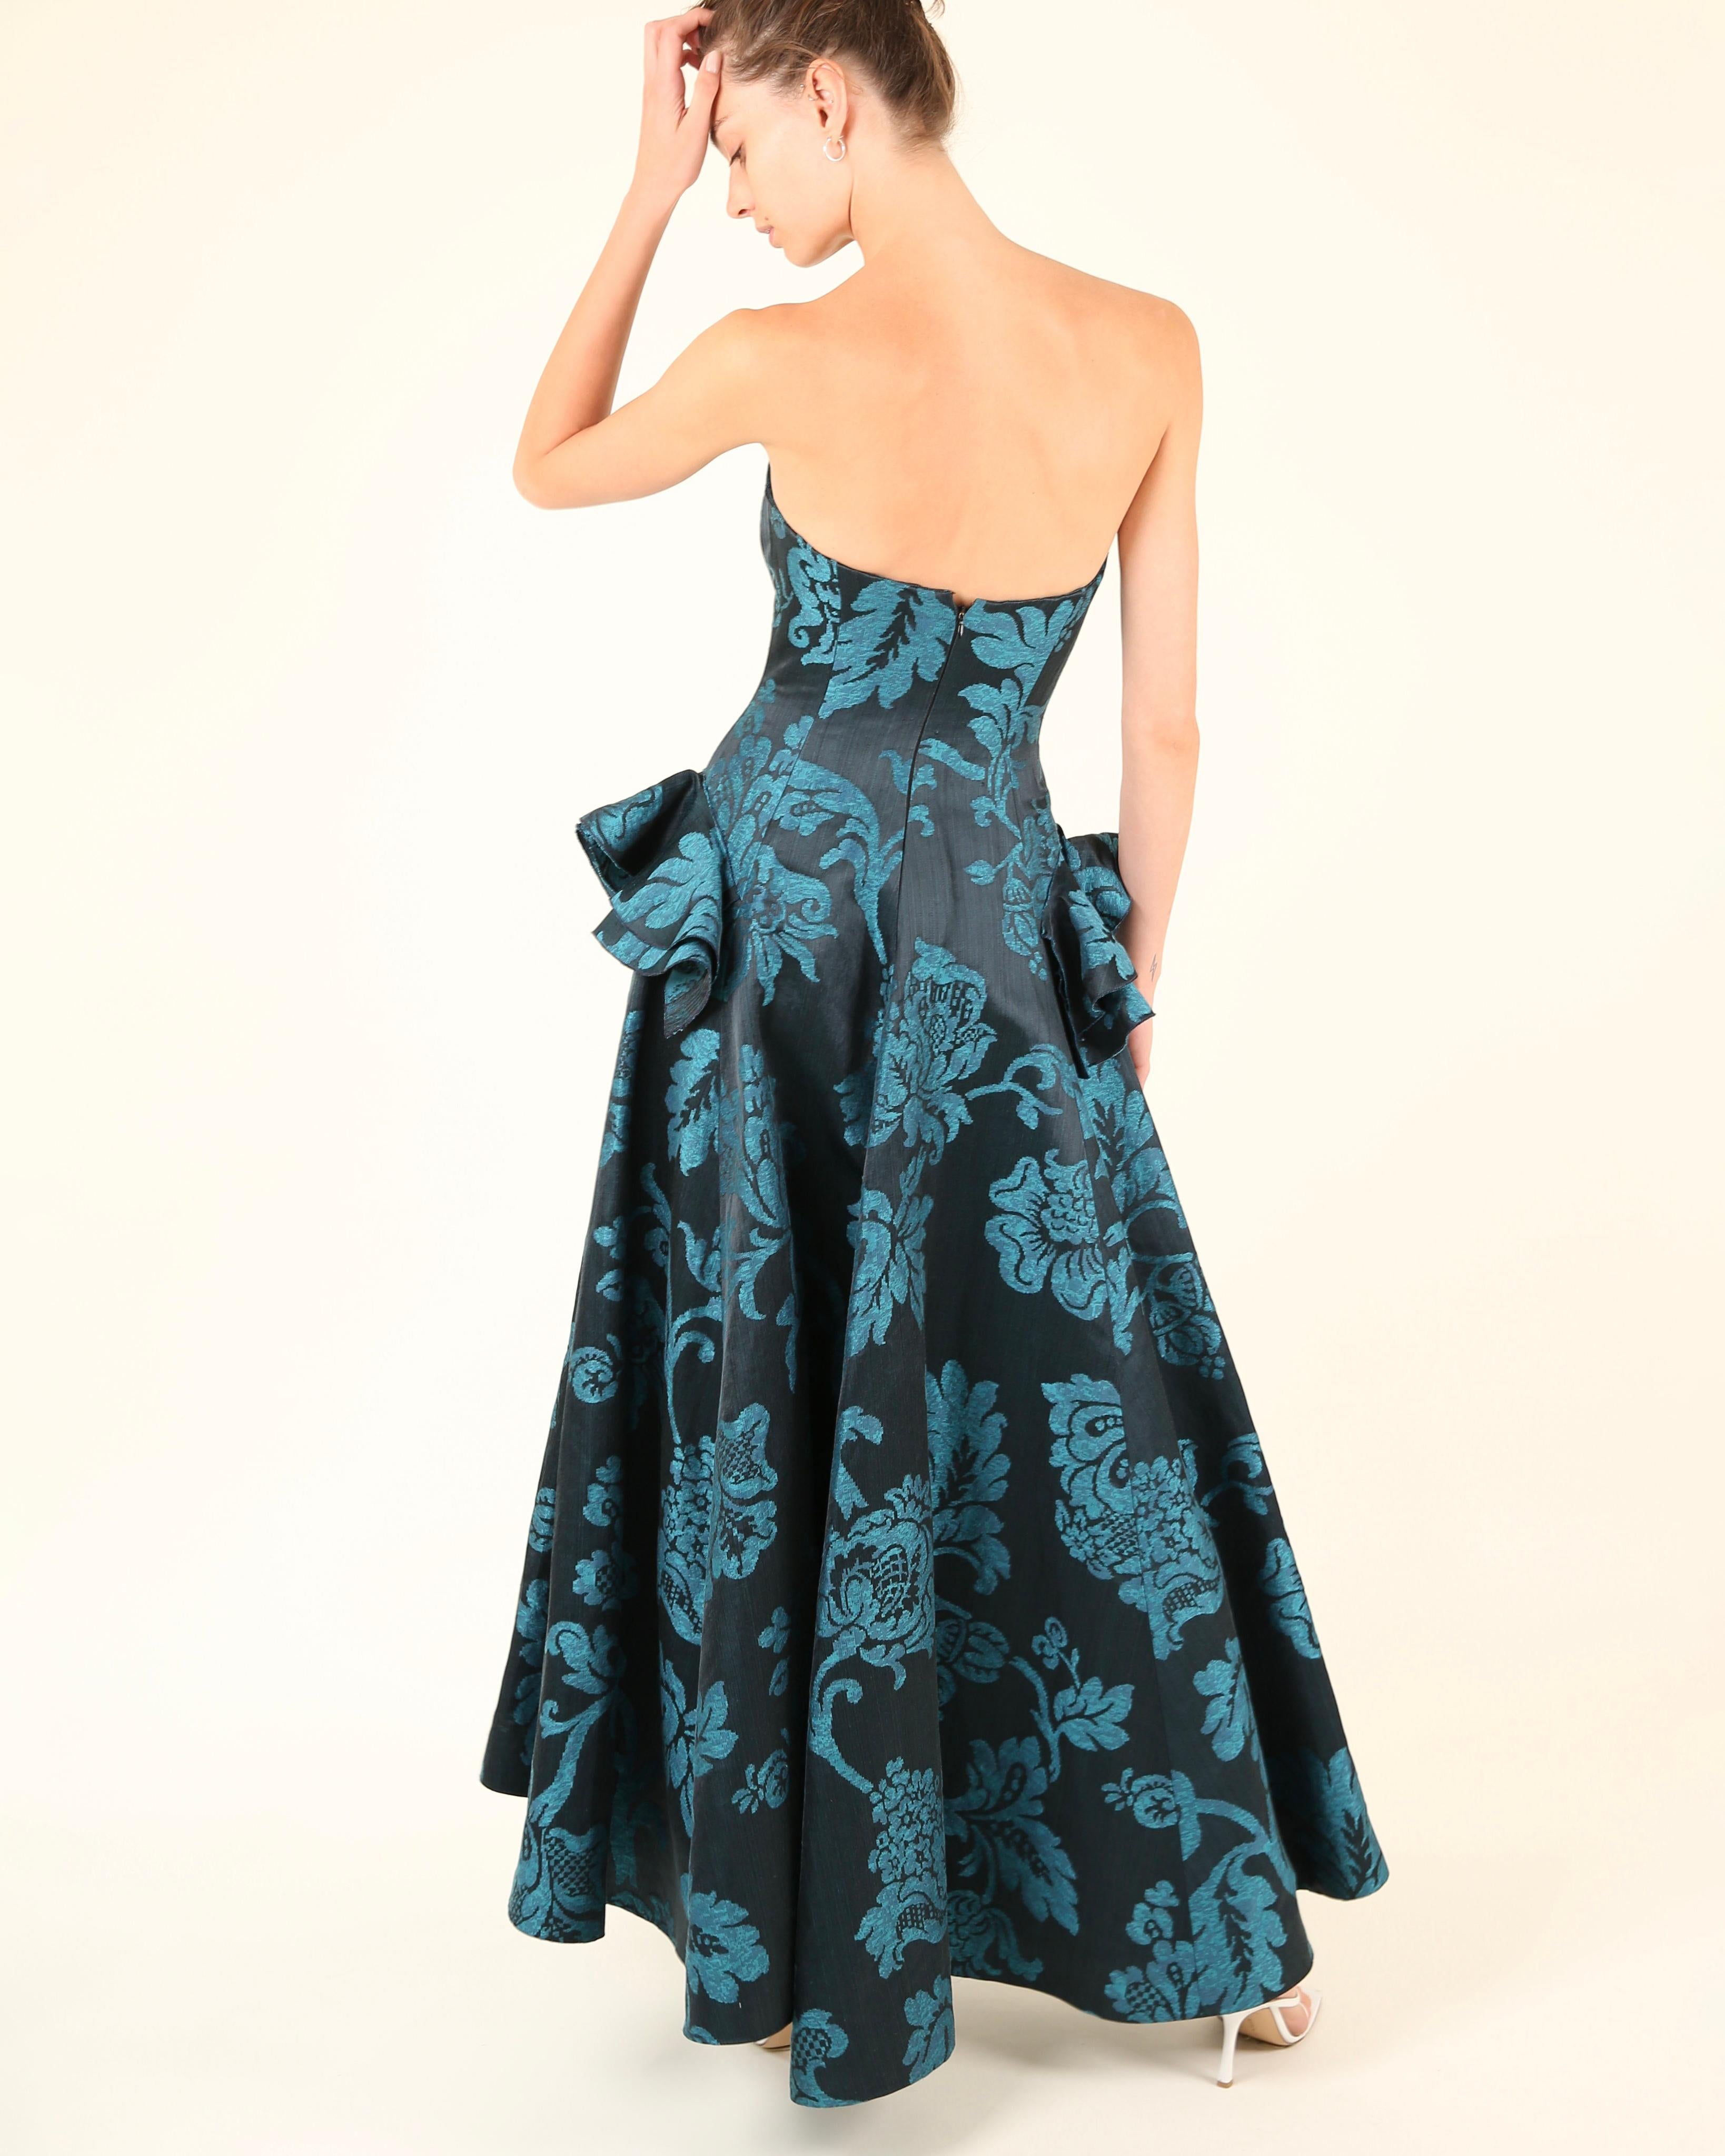 Oscar de la Renta F/W06 strapless floral blue teal fit and flare dress gown XS For Sale 14